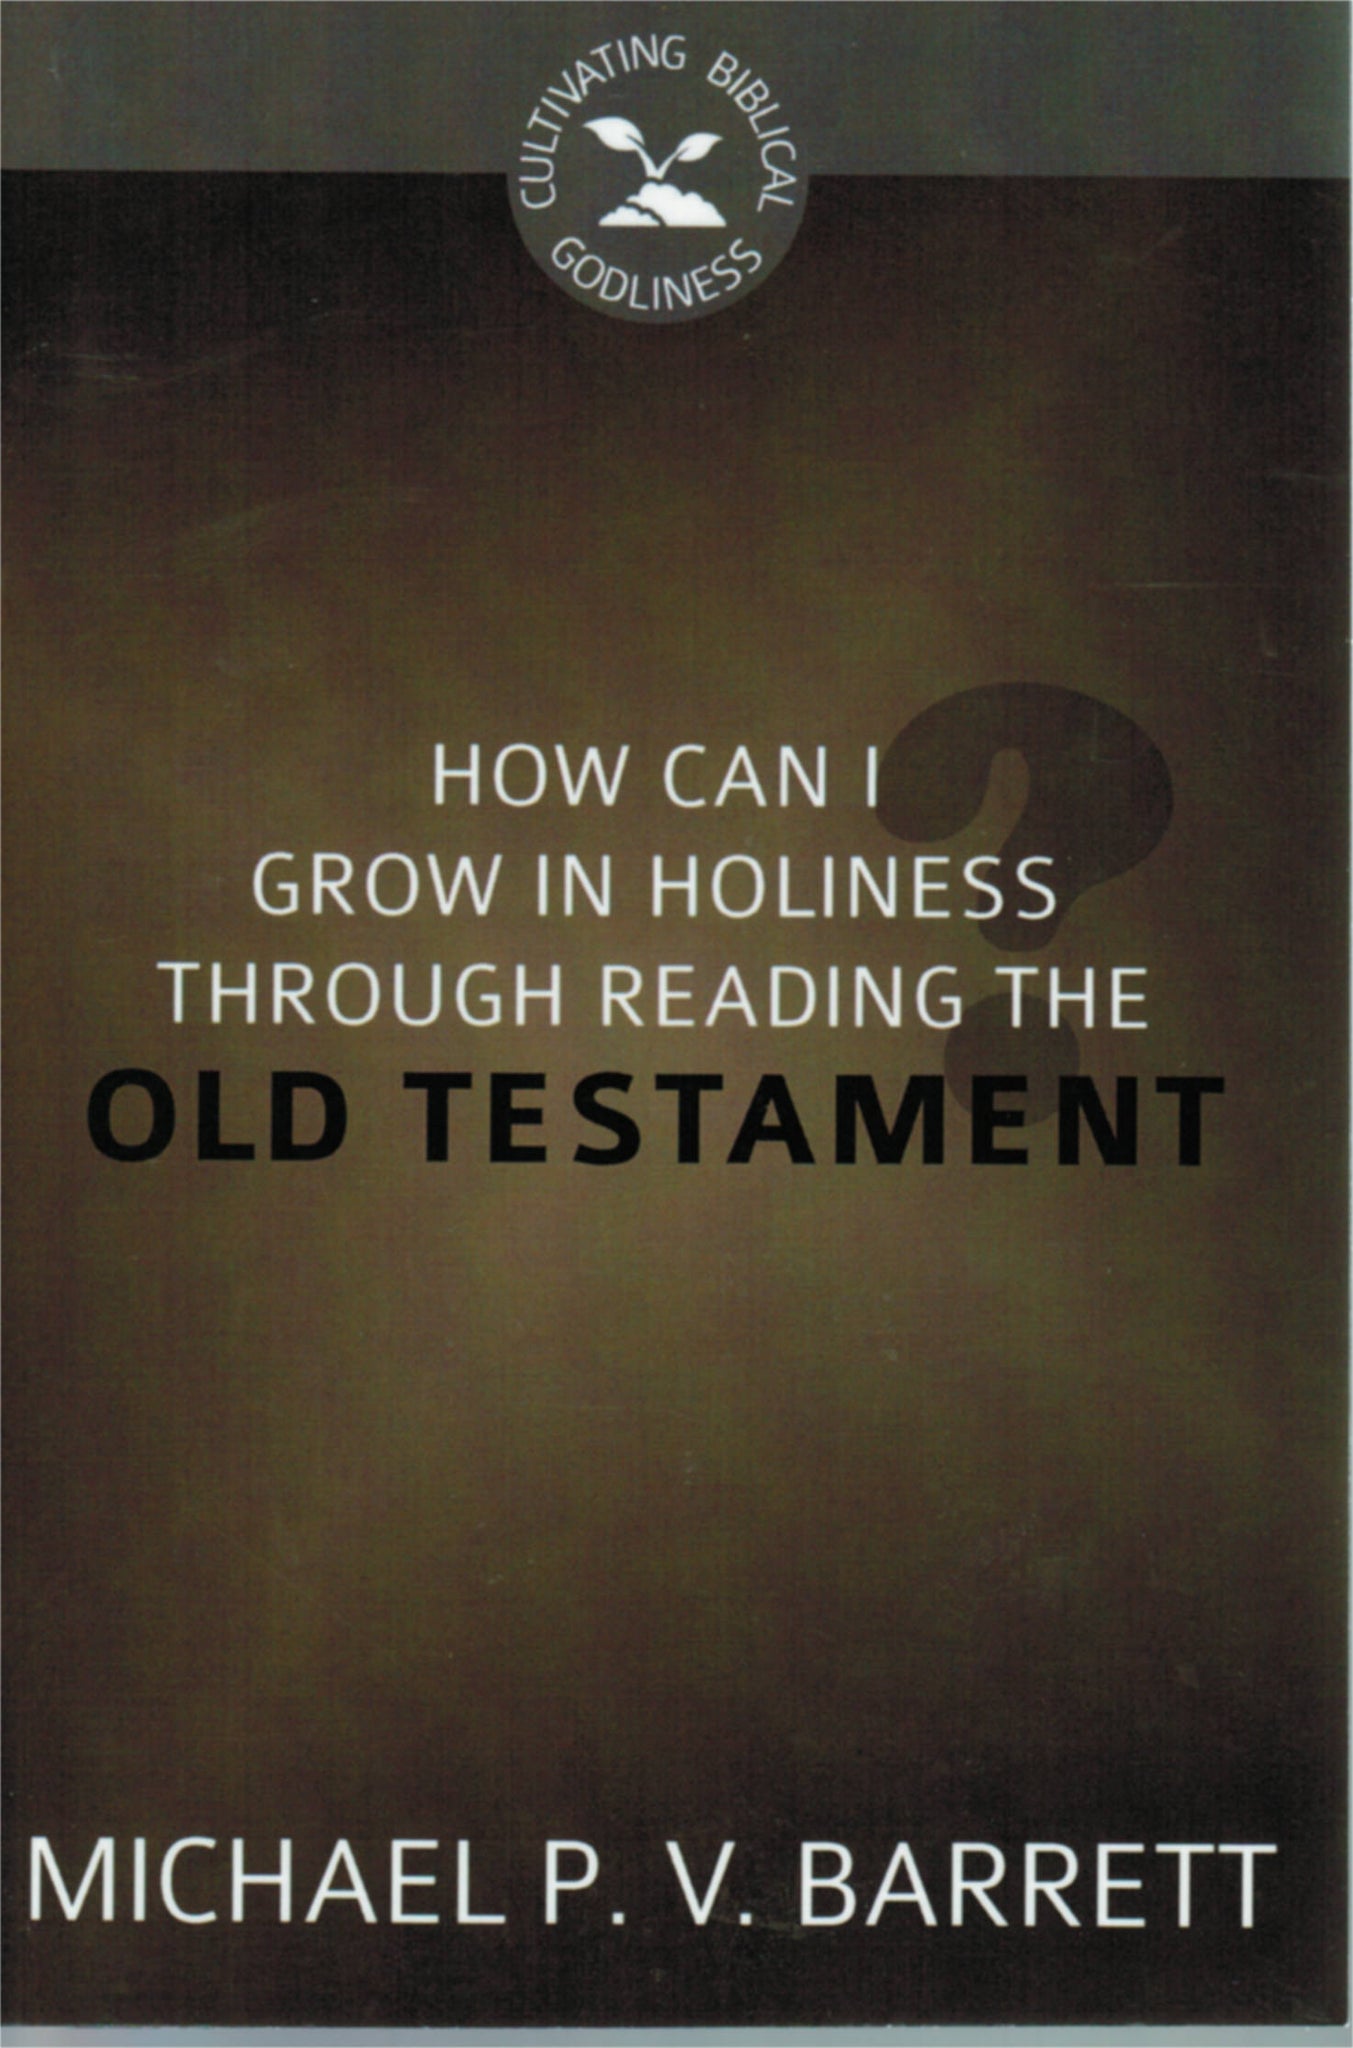 Cultivating Biblical Godliness - How Can I Grow in Holiness through Reading the Old Testament?